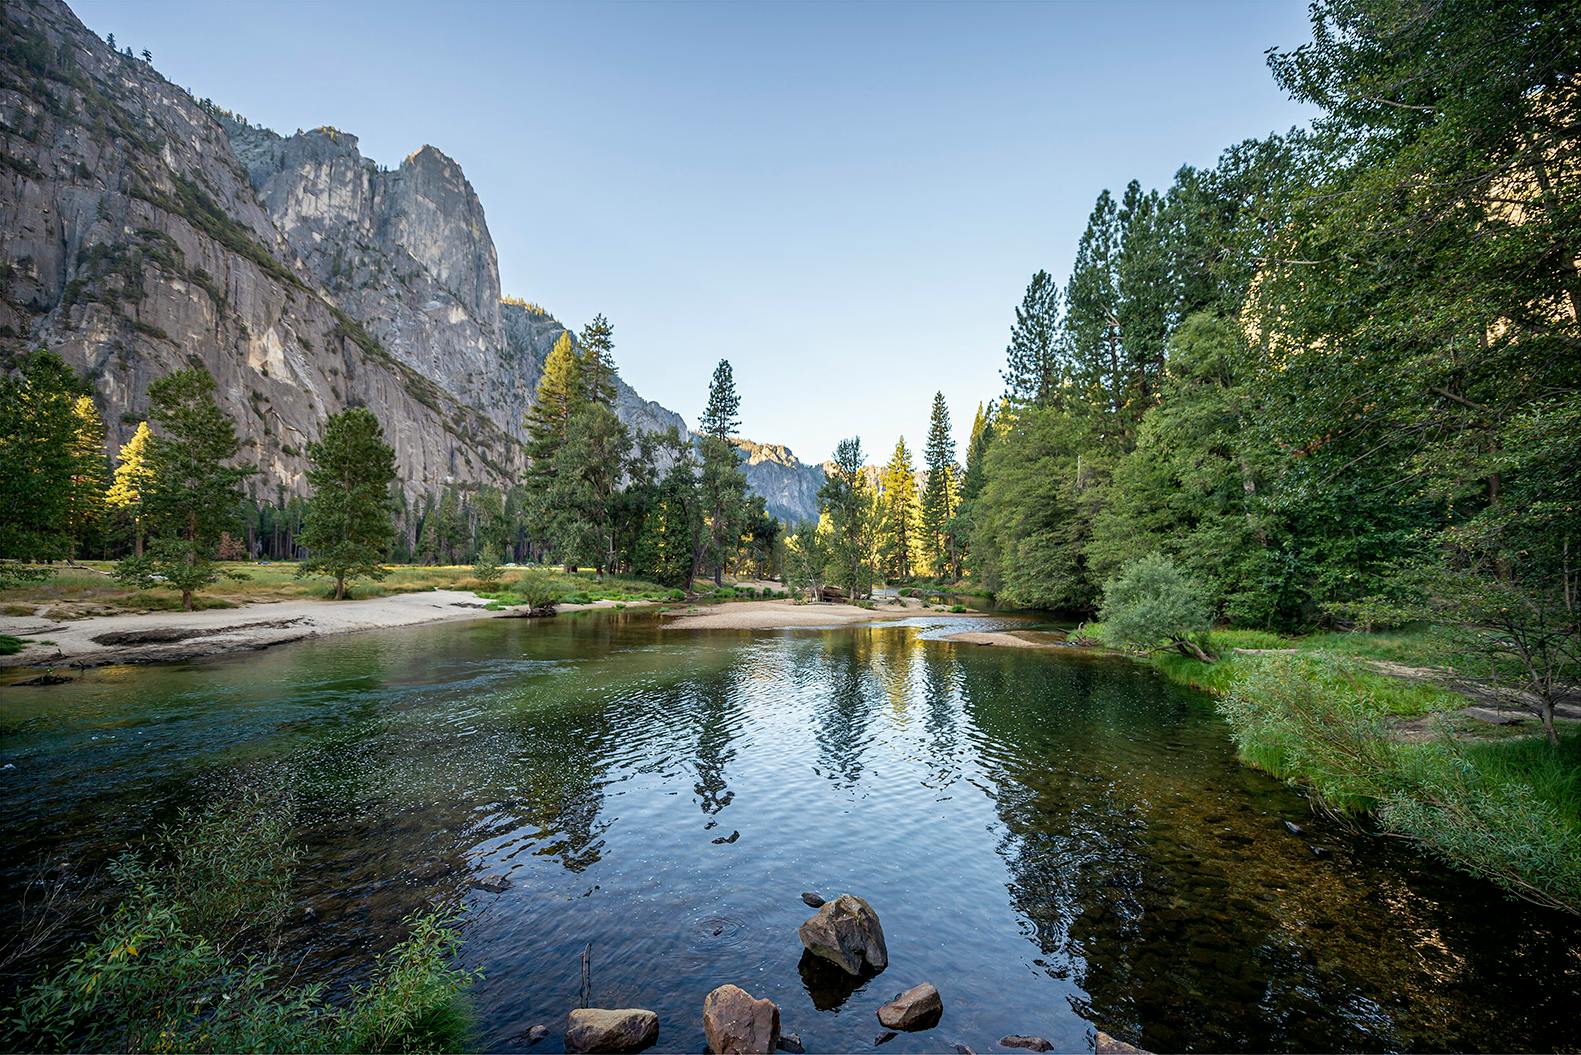 A peaceful shallow lake tucked amongst trees and a towering granite cliff in Yosemite National Park